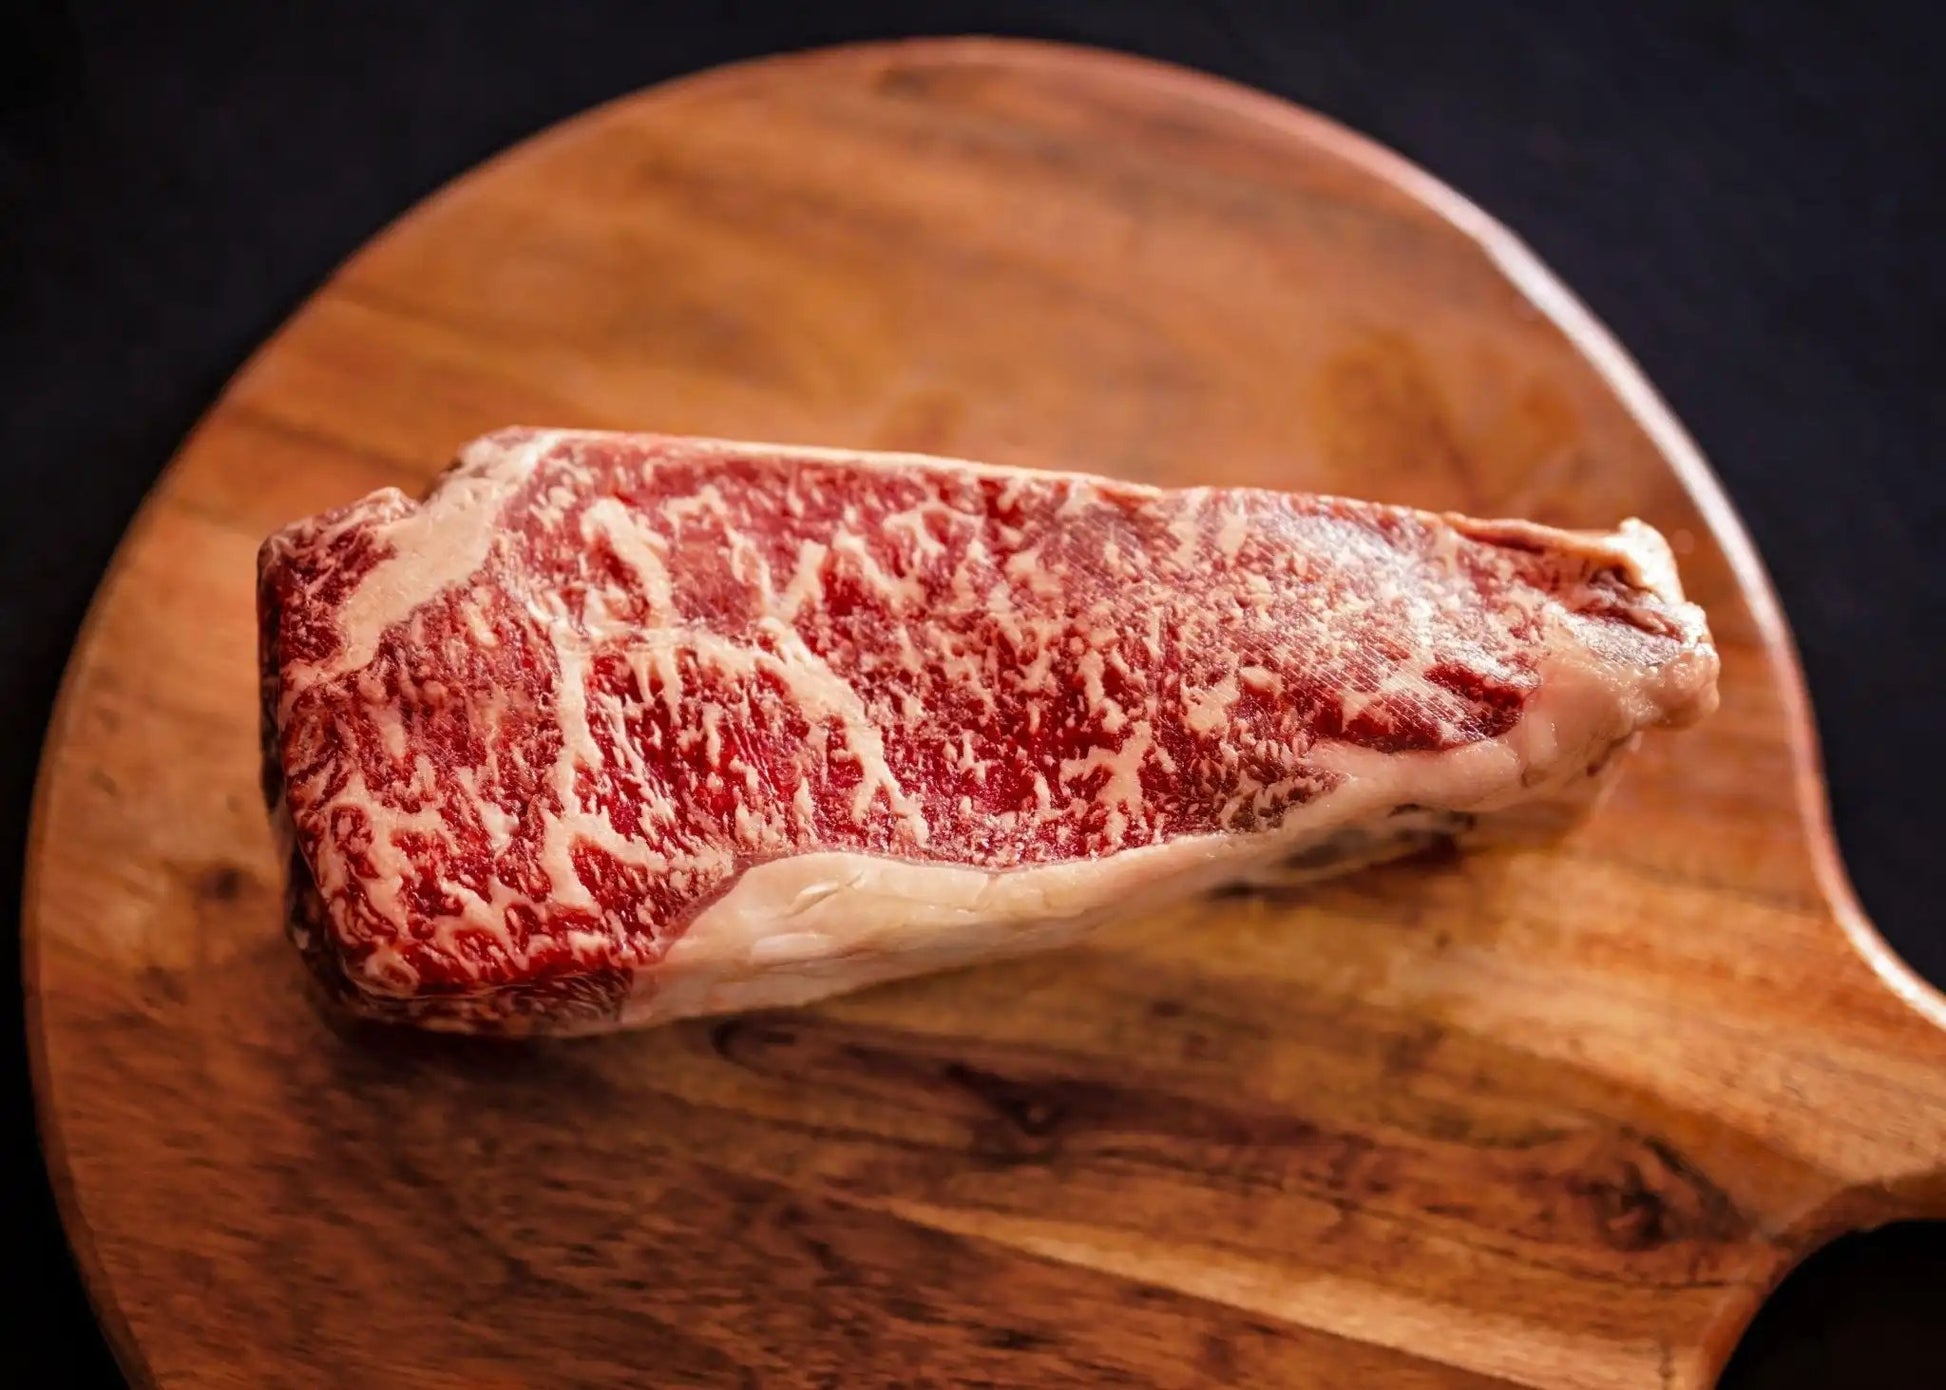 100% All-Natural Grass-Fed Pasture-Raised Wagyu Steak Lovers Beef BundThe Wagyu Steak Lovers Beef Bundle is a perfect choice for those who appreciate the exquisite taste and tenderness of premium Wagyu beef. This bundle features a sele100%The Hufeisen-Ranch (WYO Wagyu)